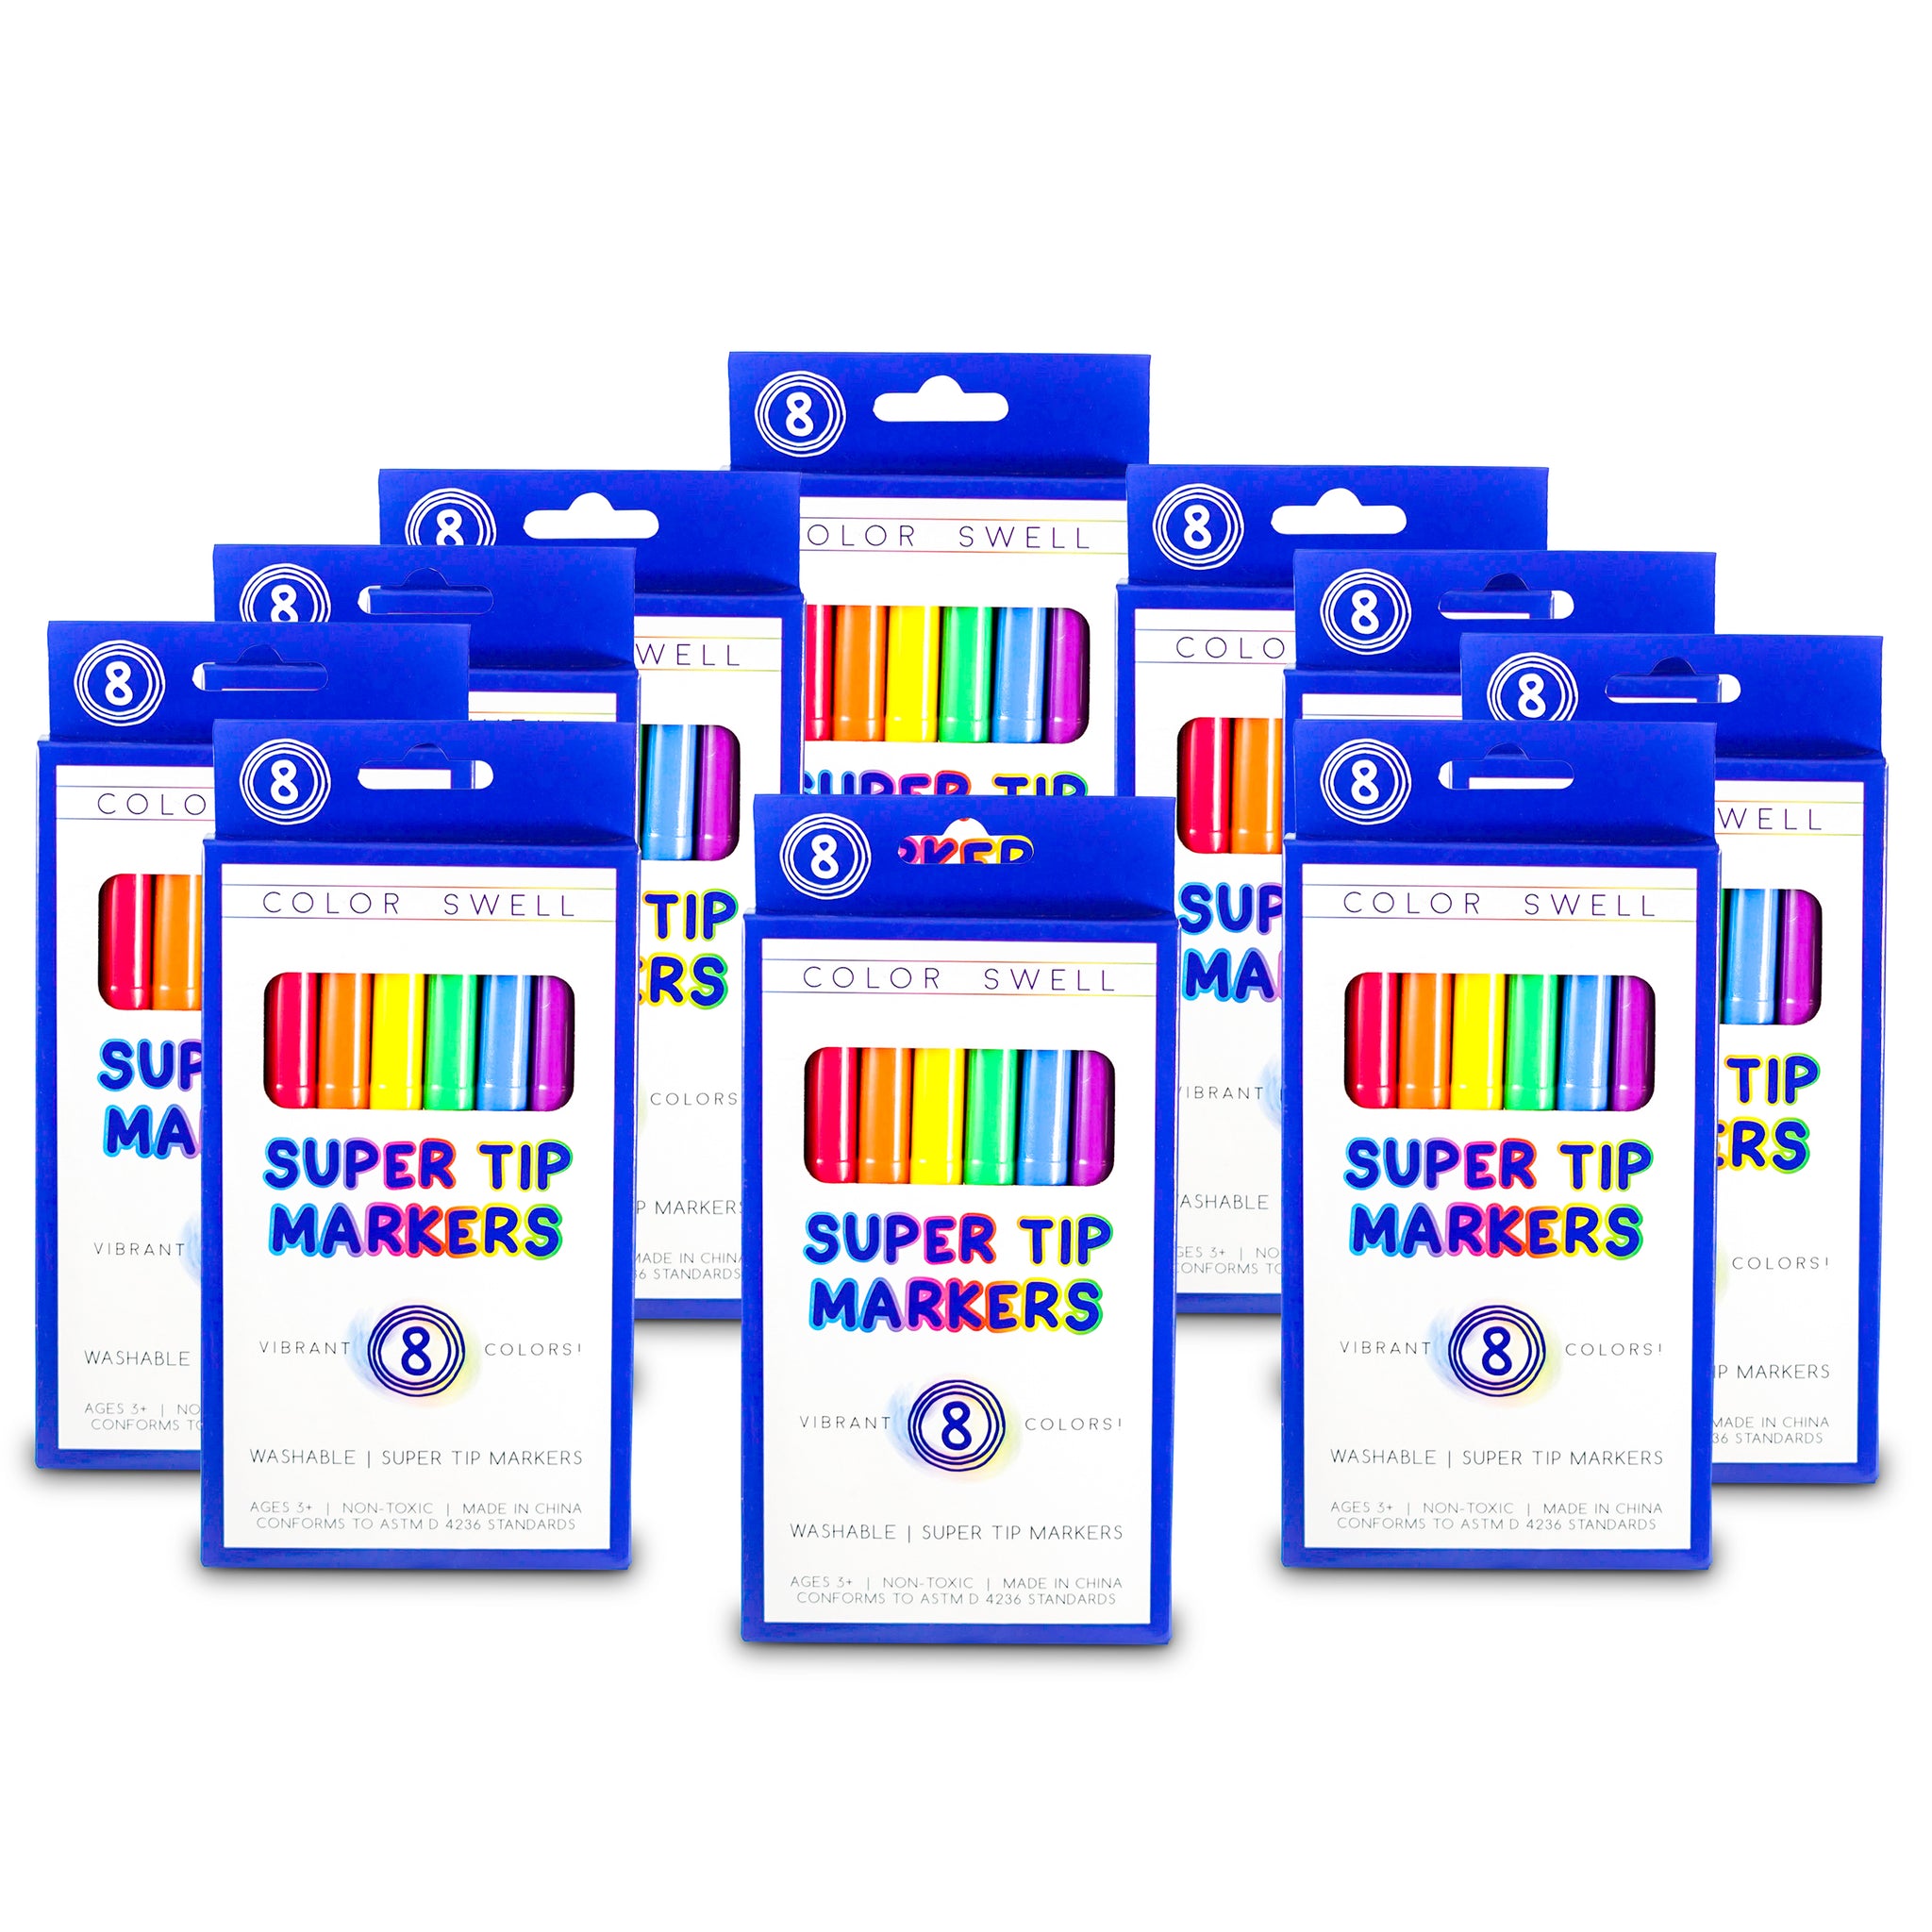 color34 Color Swell Super Tip Washable Bulk Marers Pack 10 Boxes of 8  Vibrant Colors (80 Total)